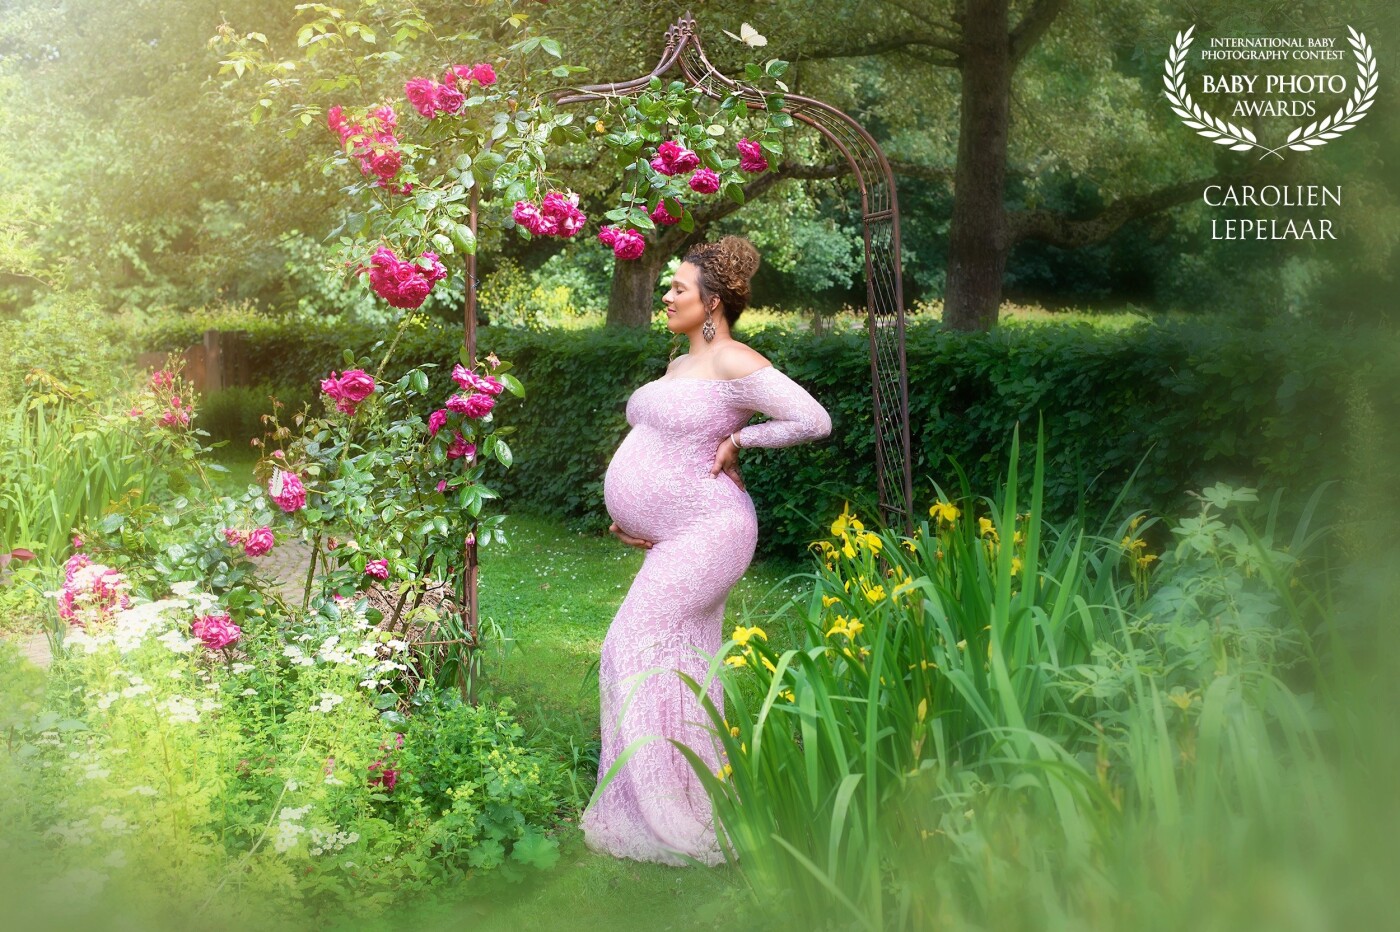 This beautiful pregnant woman asked me for a location with lots of flowers and I found this amazing garden full of colors and romance. The result: a heavenly image with a touch of magic & romance.